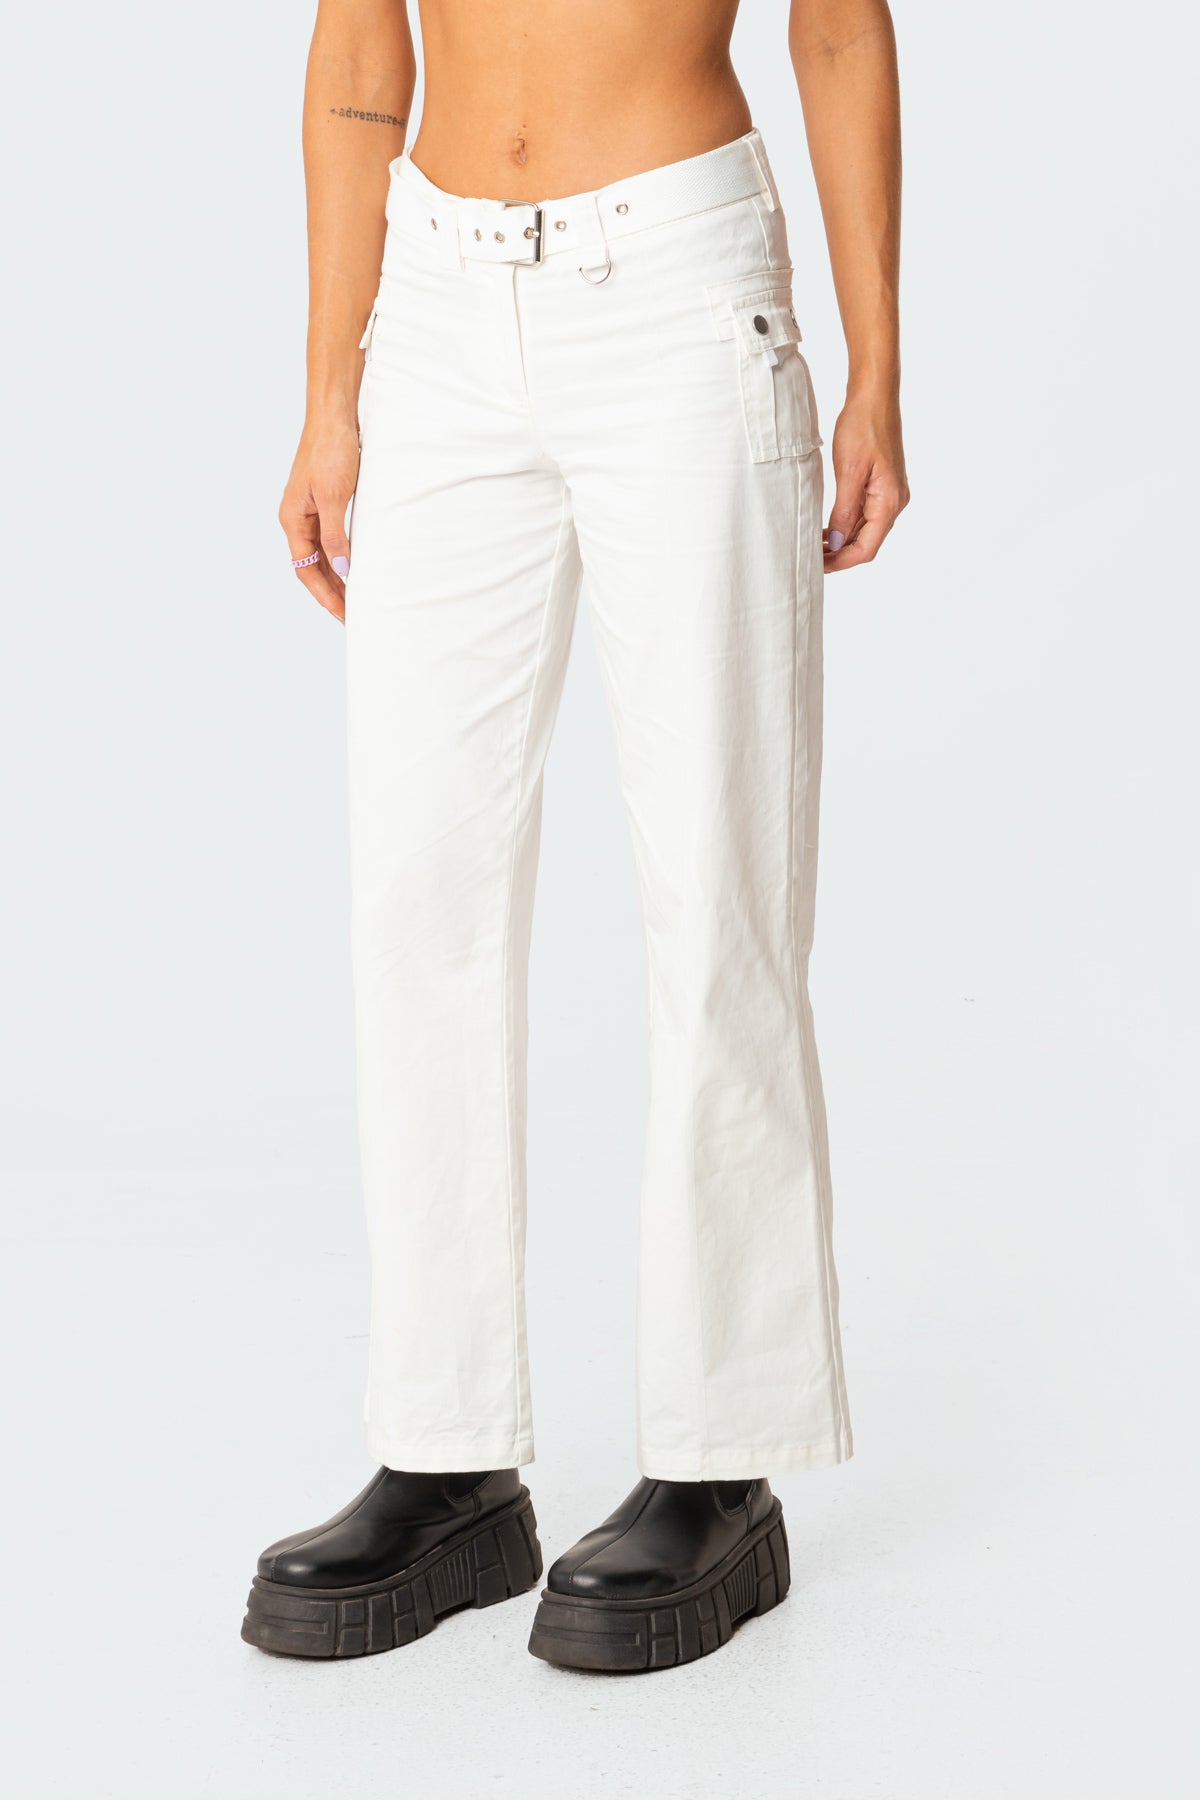 Reveey Pants - Low Rise Cargo Pants in White